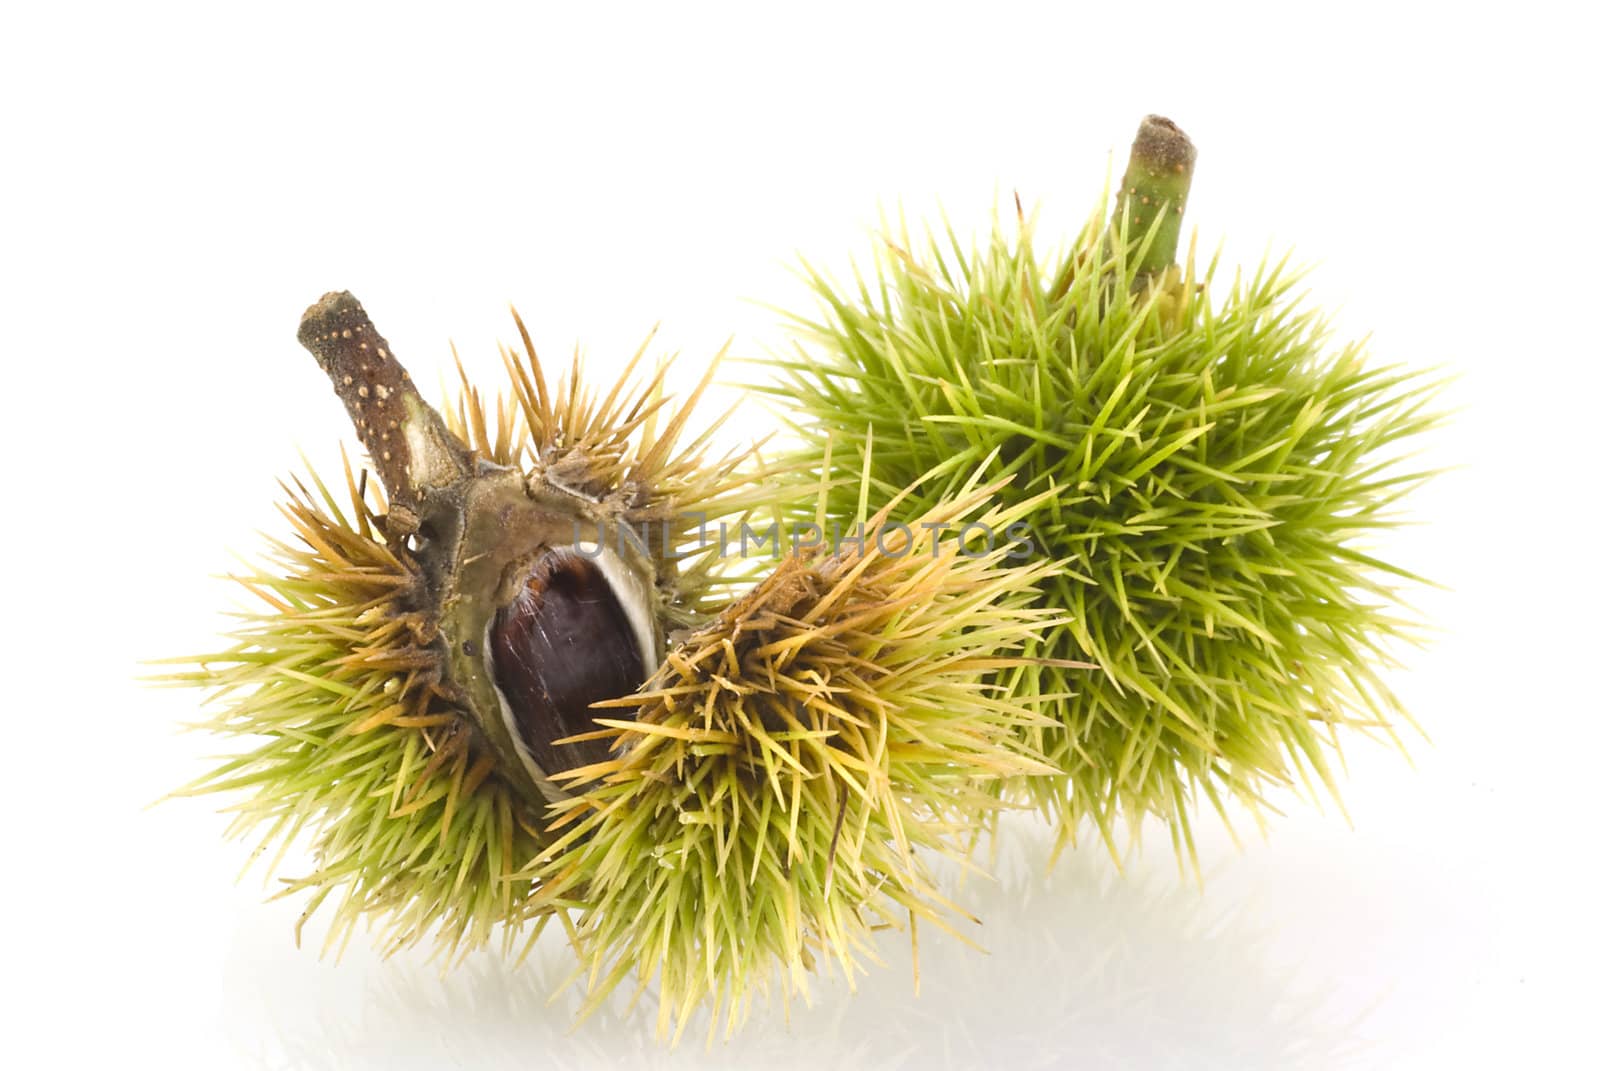 Chestnuts still in its shell, isolated on a white background.